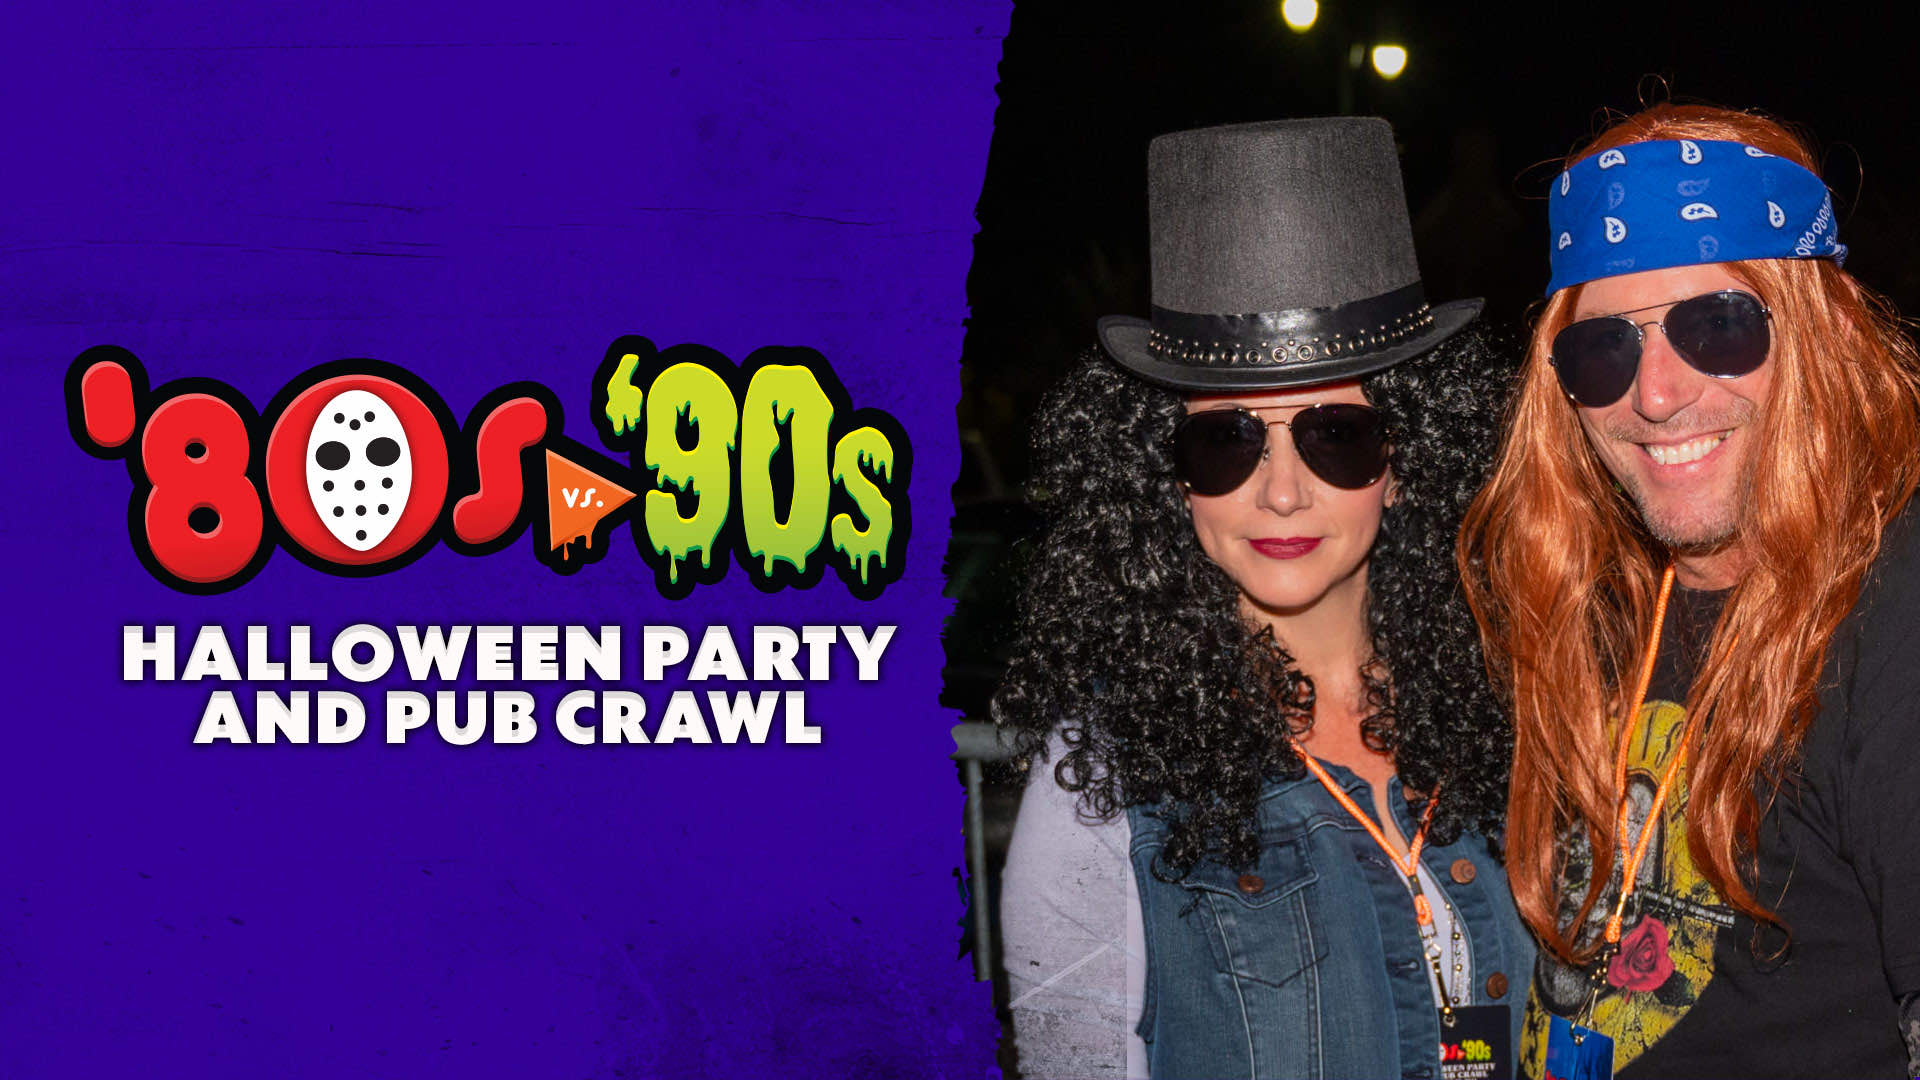 '80s vs. '90s Halloween Party & Pub Crawl in Downtown Wyandotte; with image of two party goers in rocker costumers